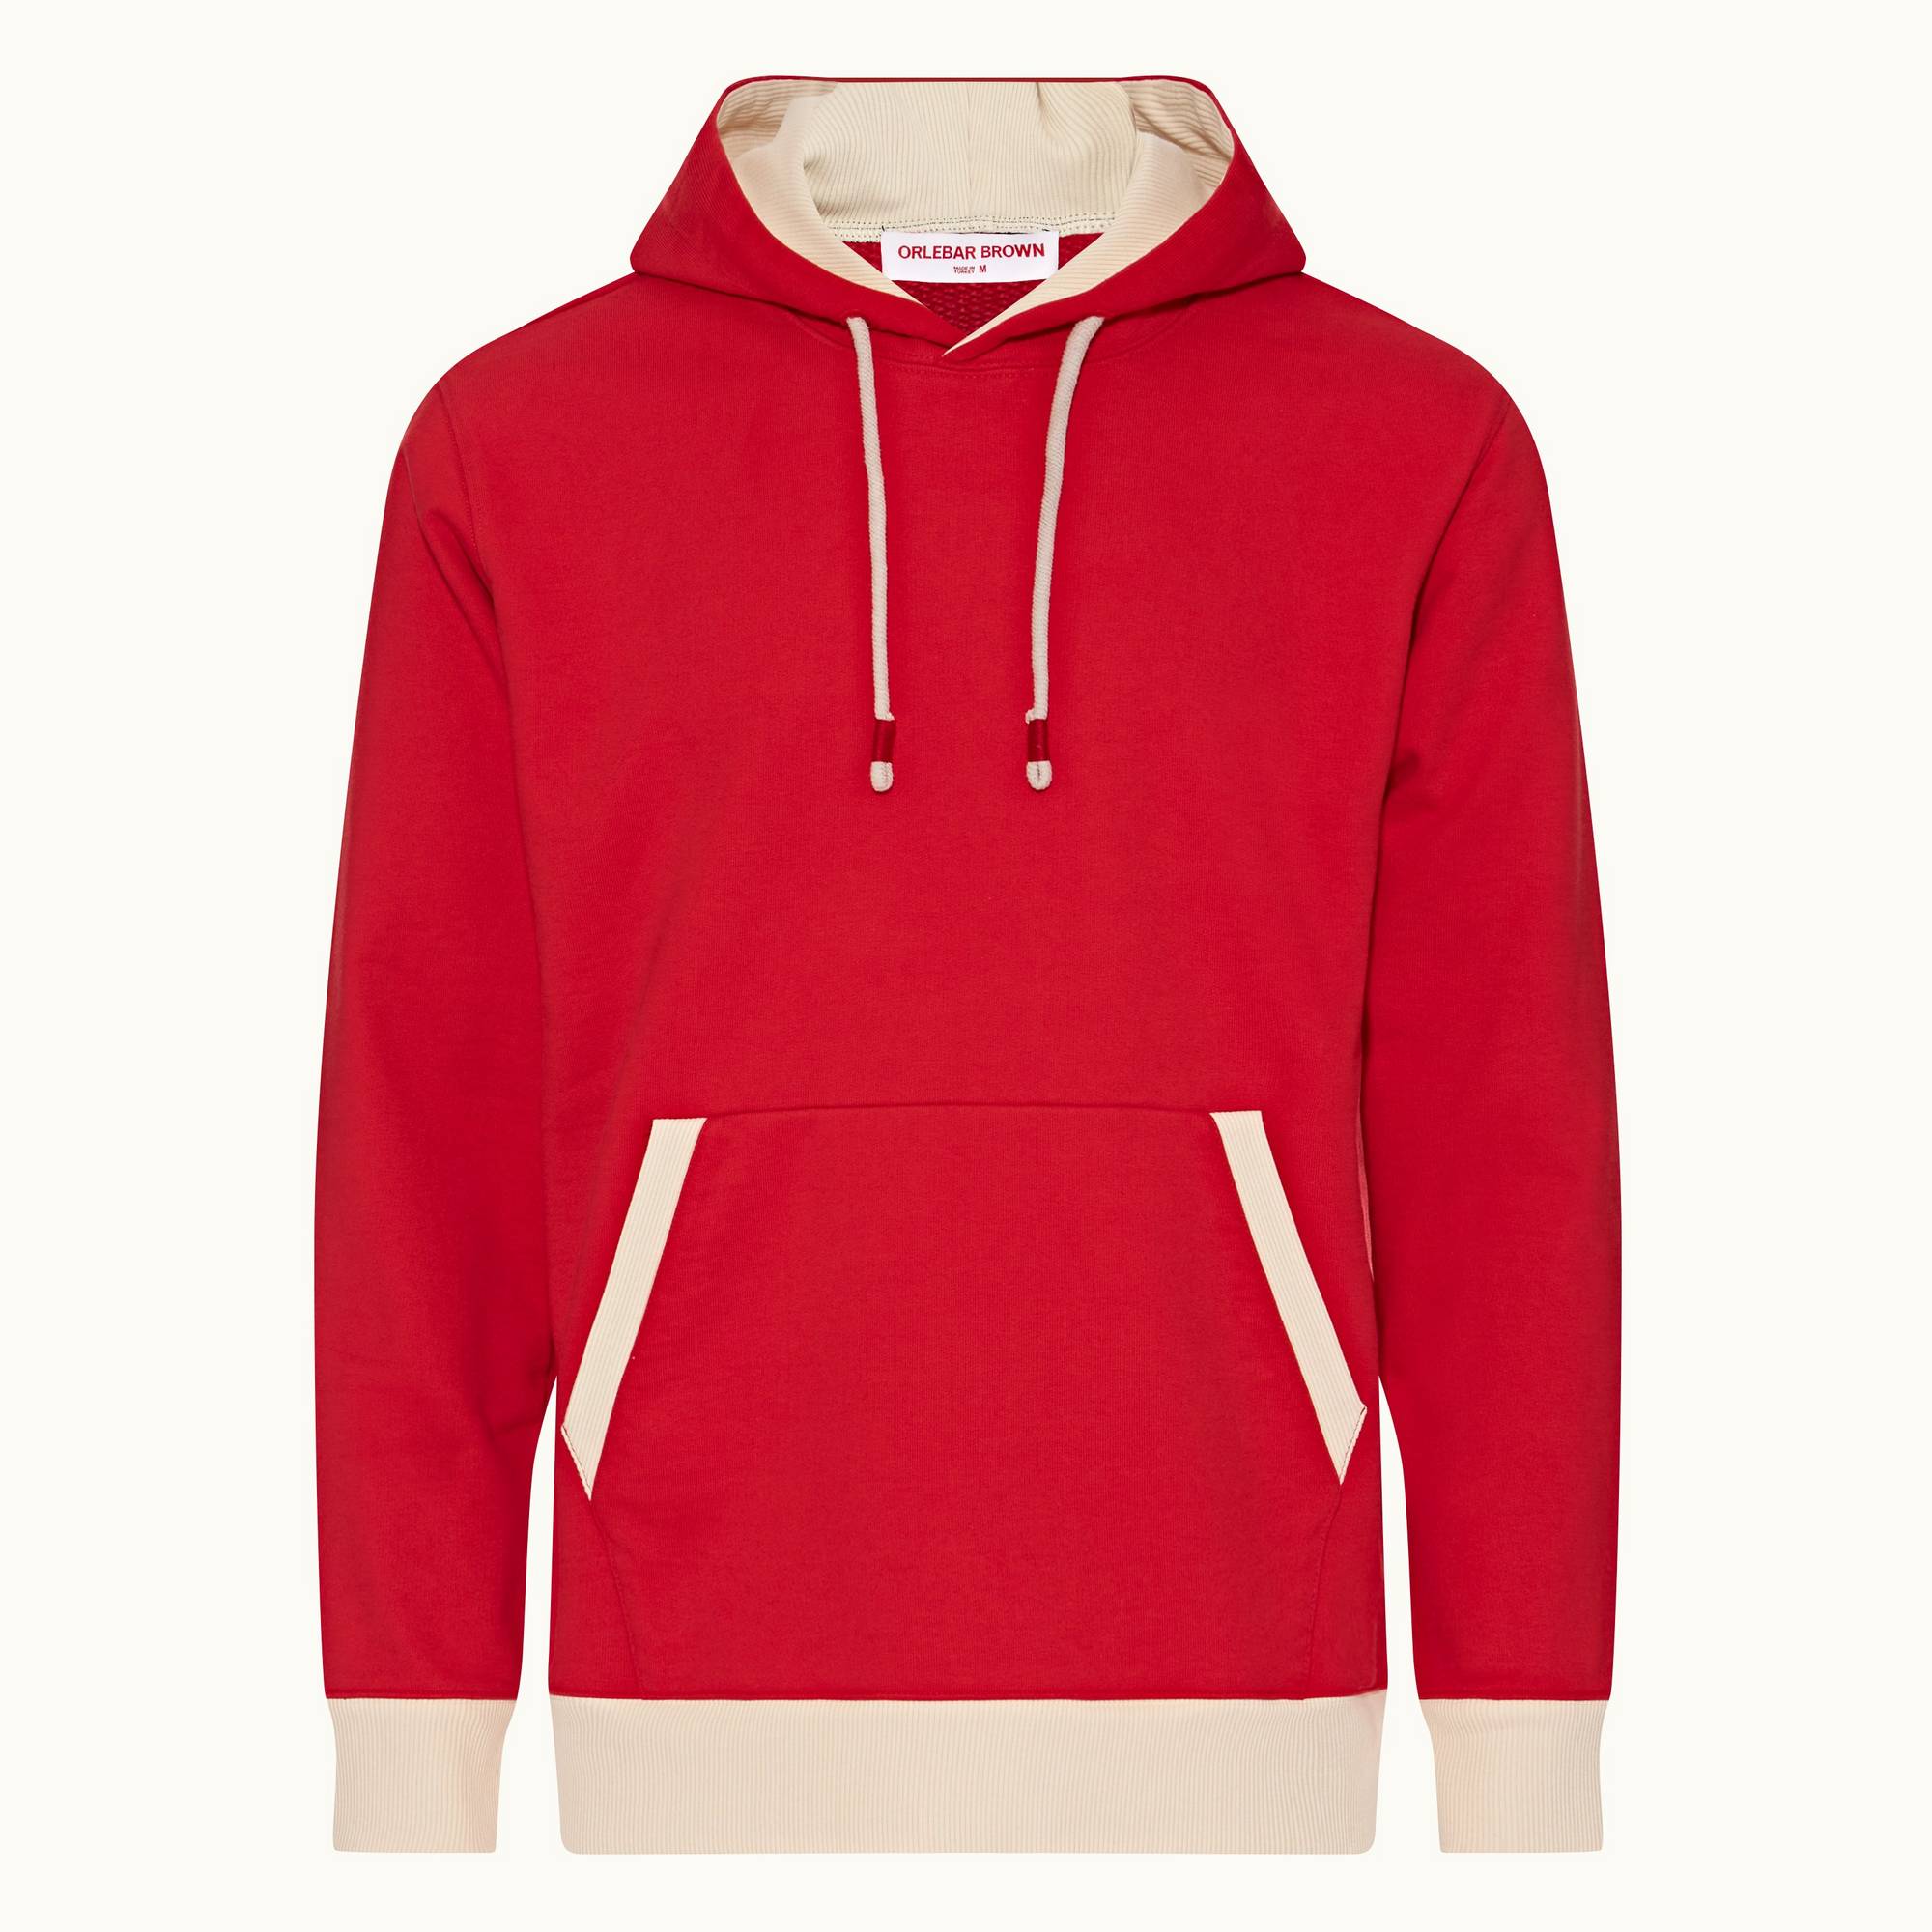 Ernest - Mens Vermillion Contrast Easy Fit Washed Organic Cotton Hooded Sweatshirt